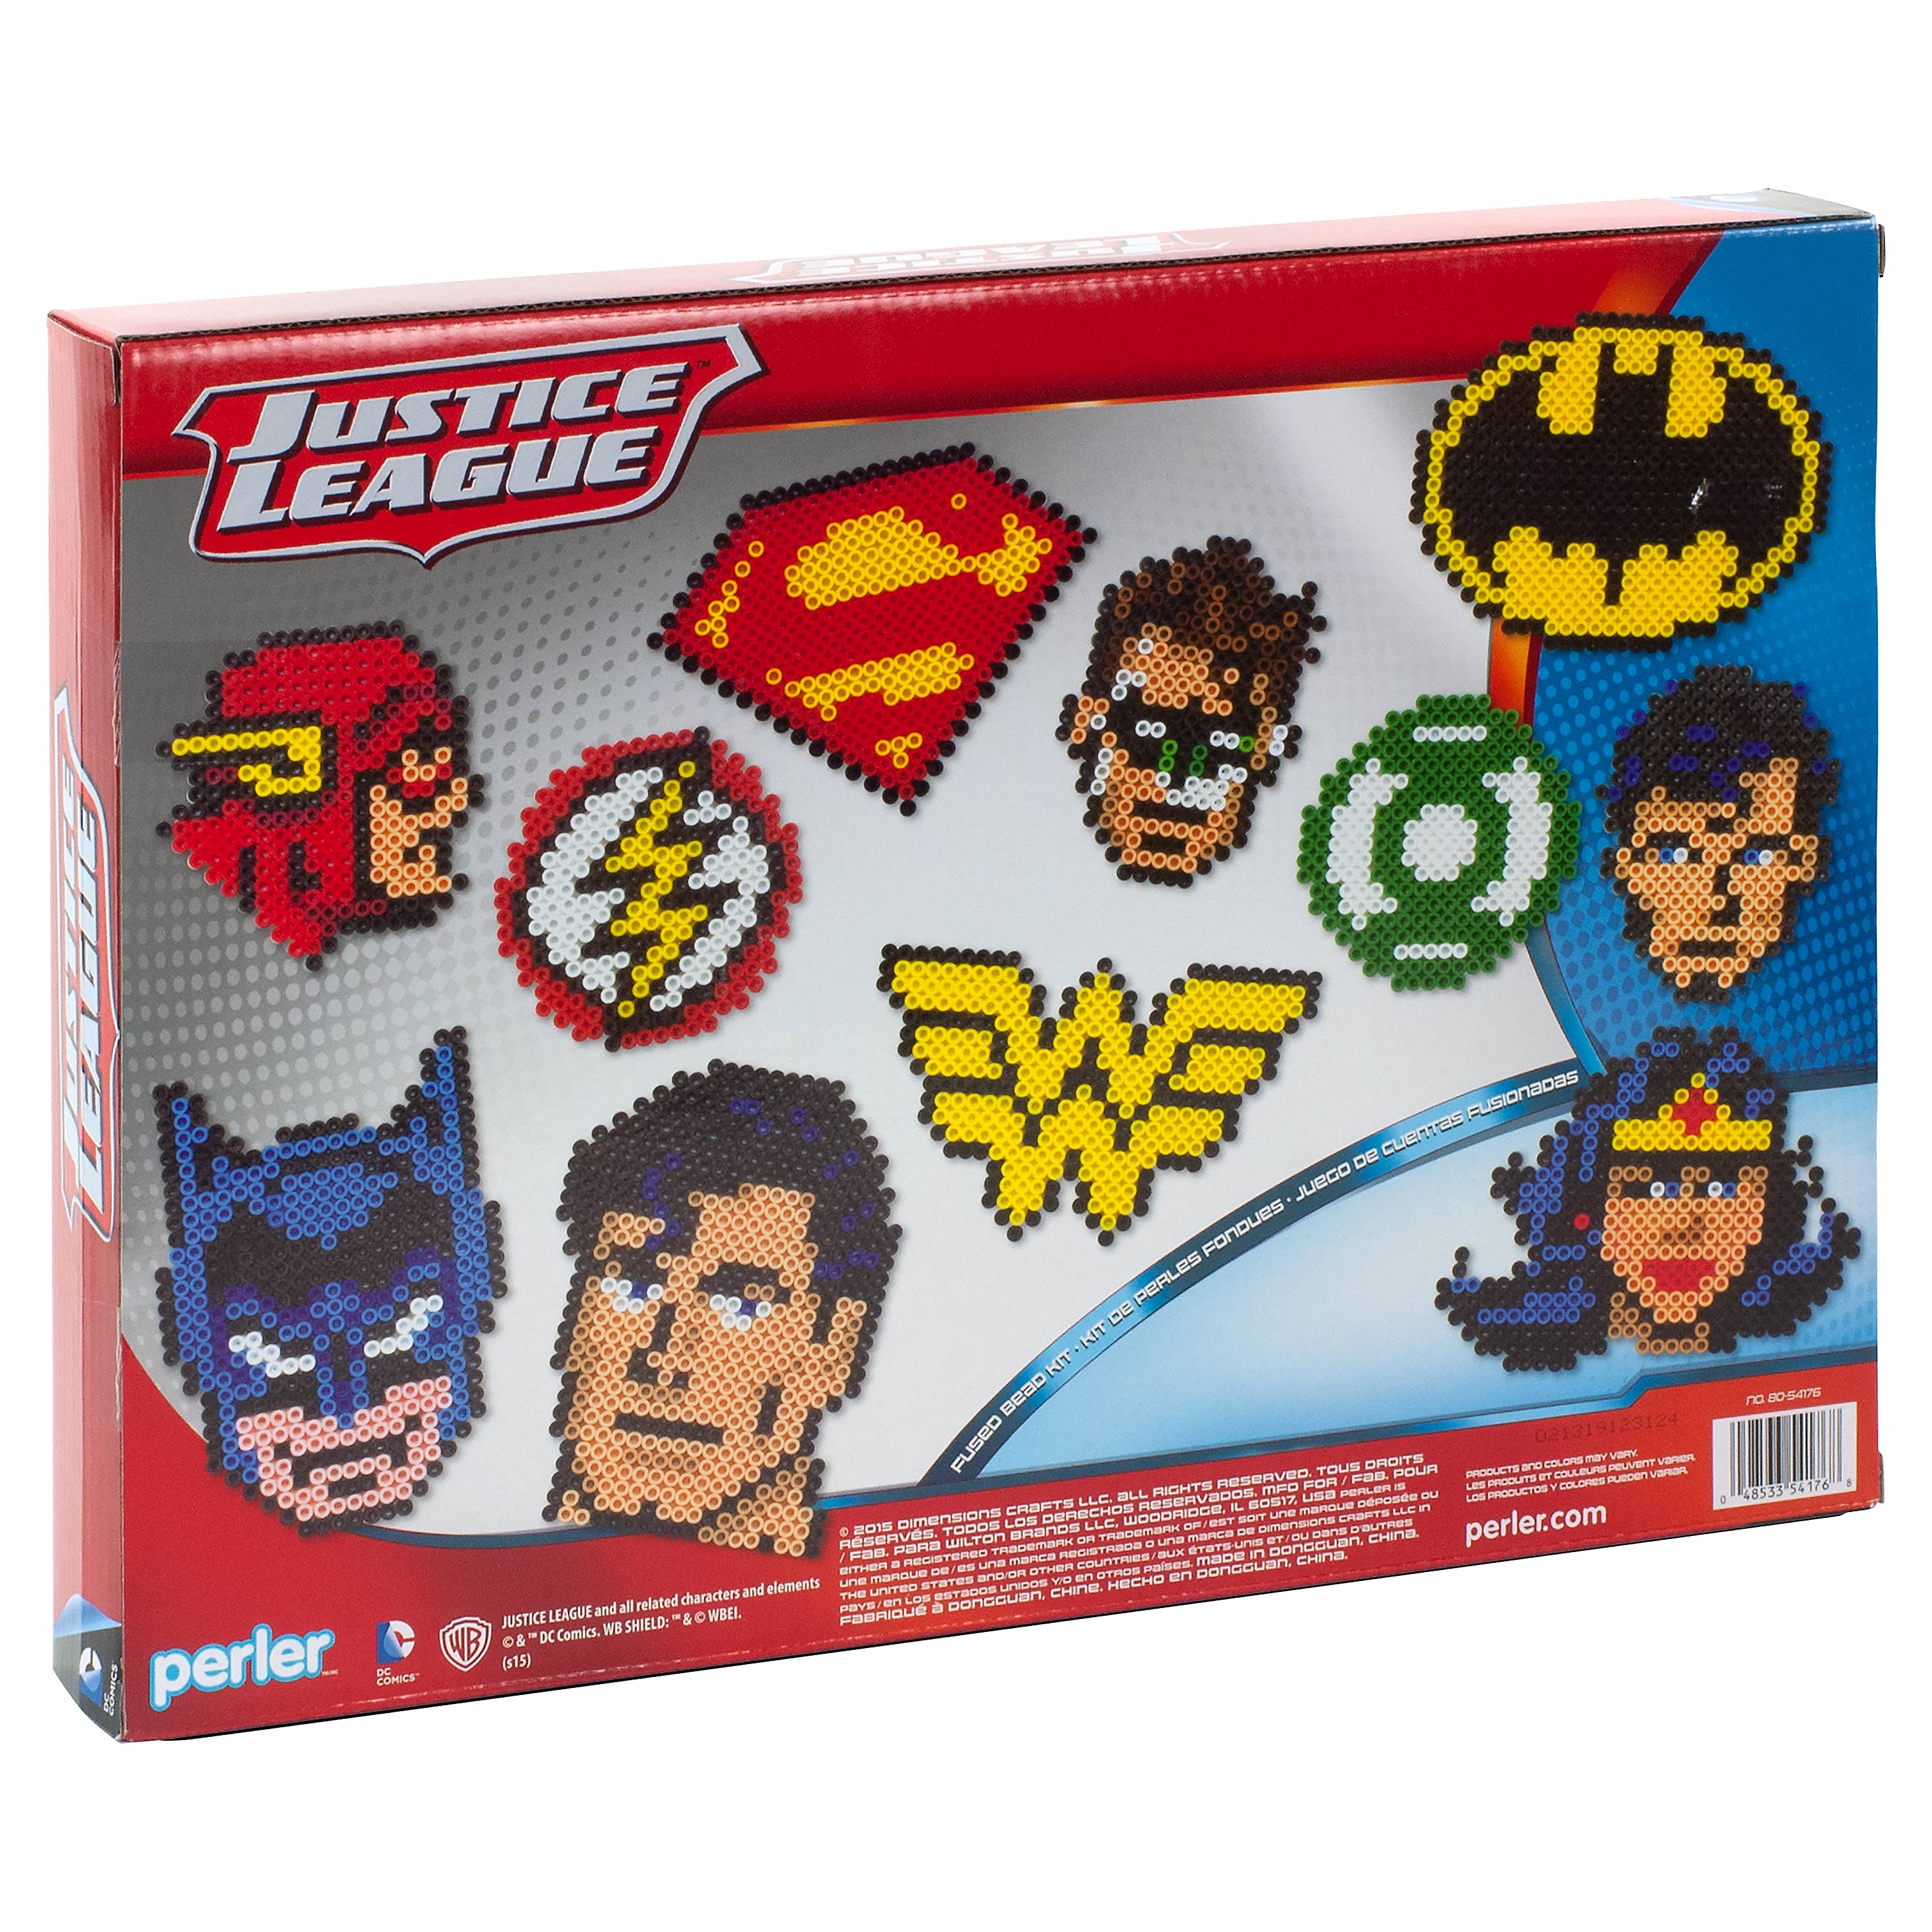 Perler Fused Bead Kit Deluxe Box Justice League, Ages 6 & up - image 2 of 4